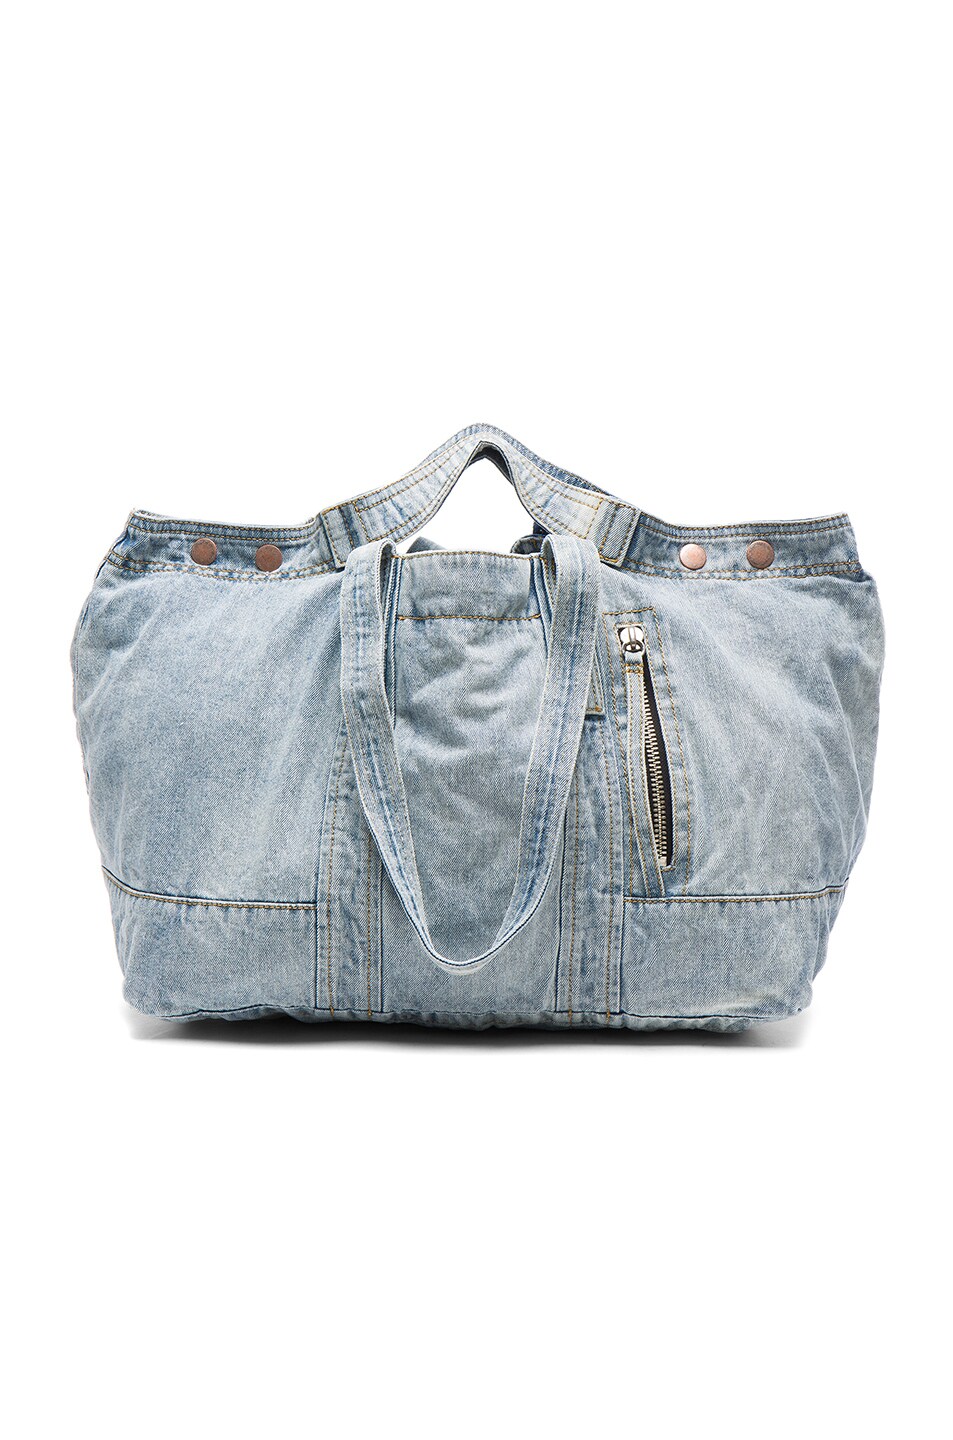 Image 1 of 3.1 phillip lim Field Tote in Light Blue